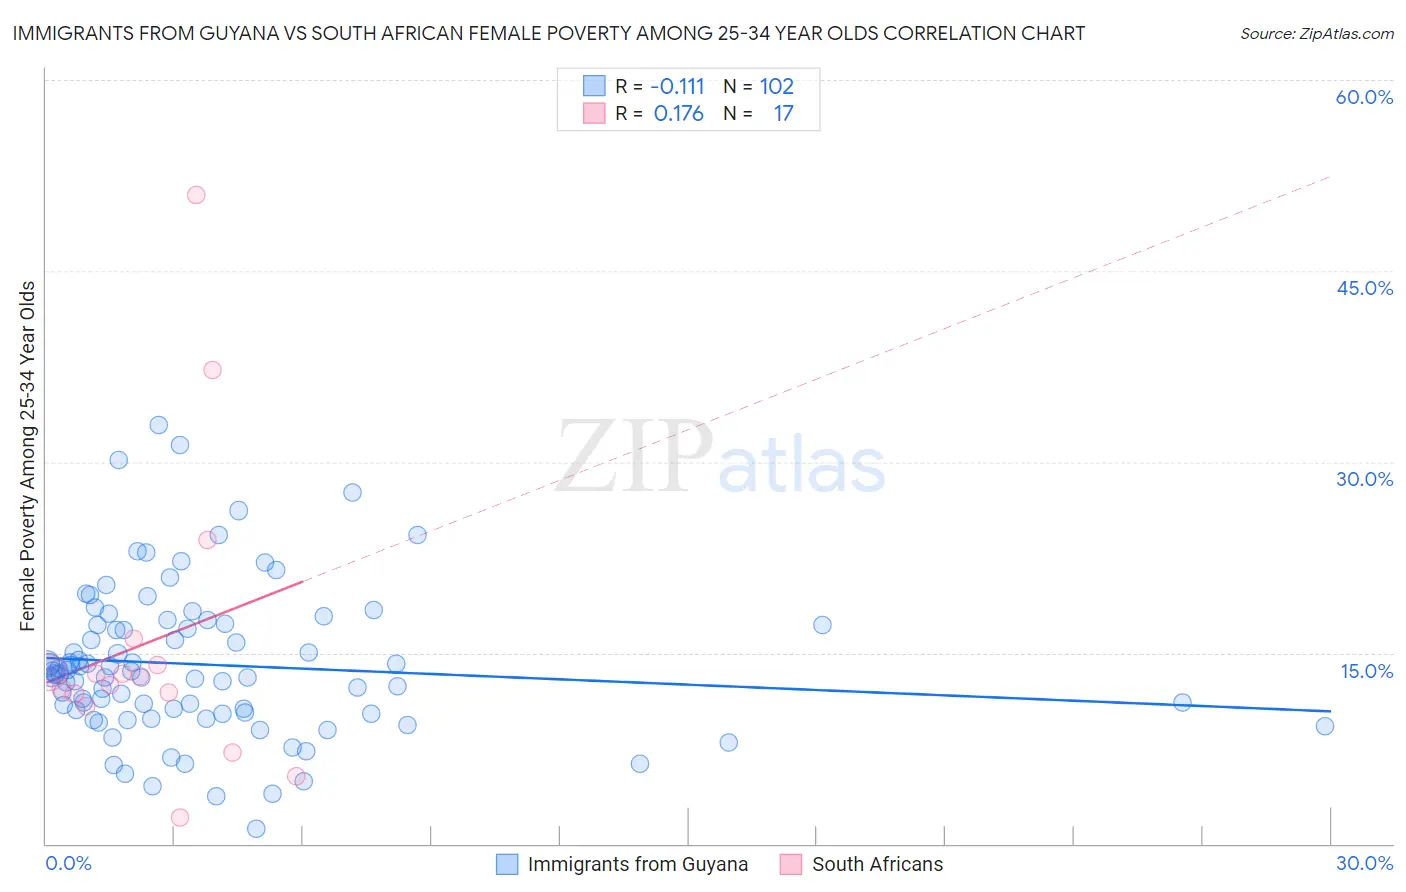 Immigrants from Guyana vs South African Female Poverty Among 25-34 Year Olds